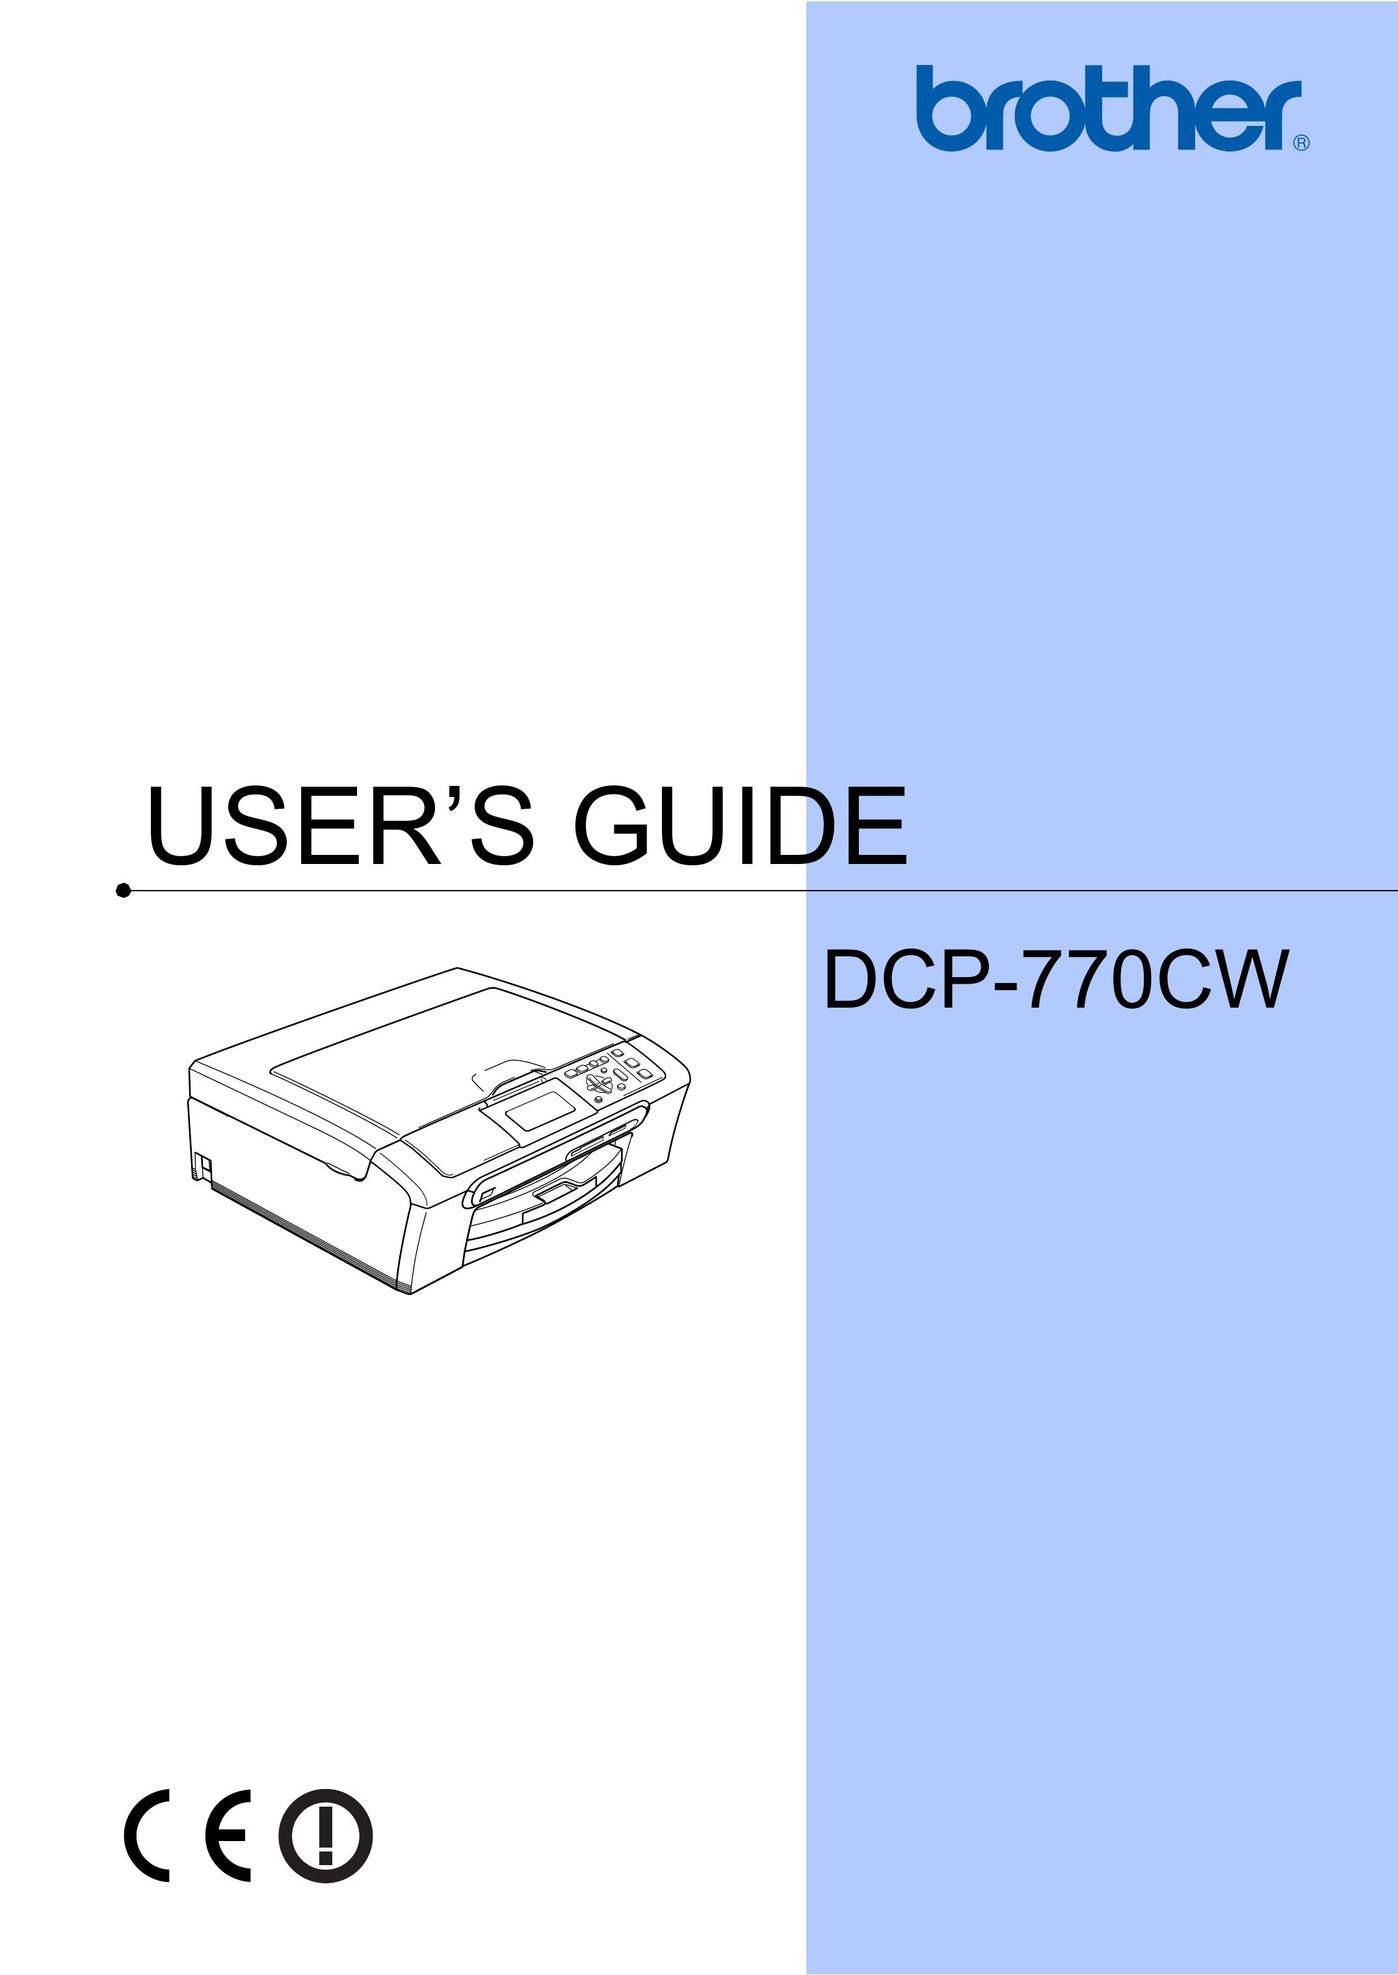 Brother DCP-770CW Fax Machine User Manual